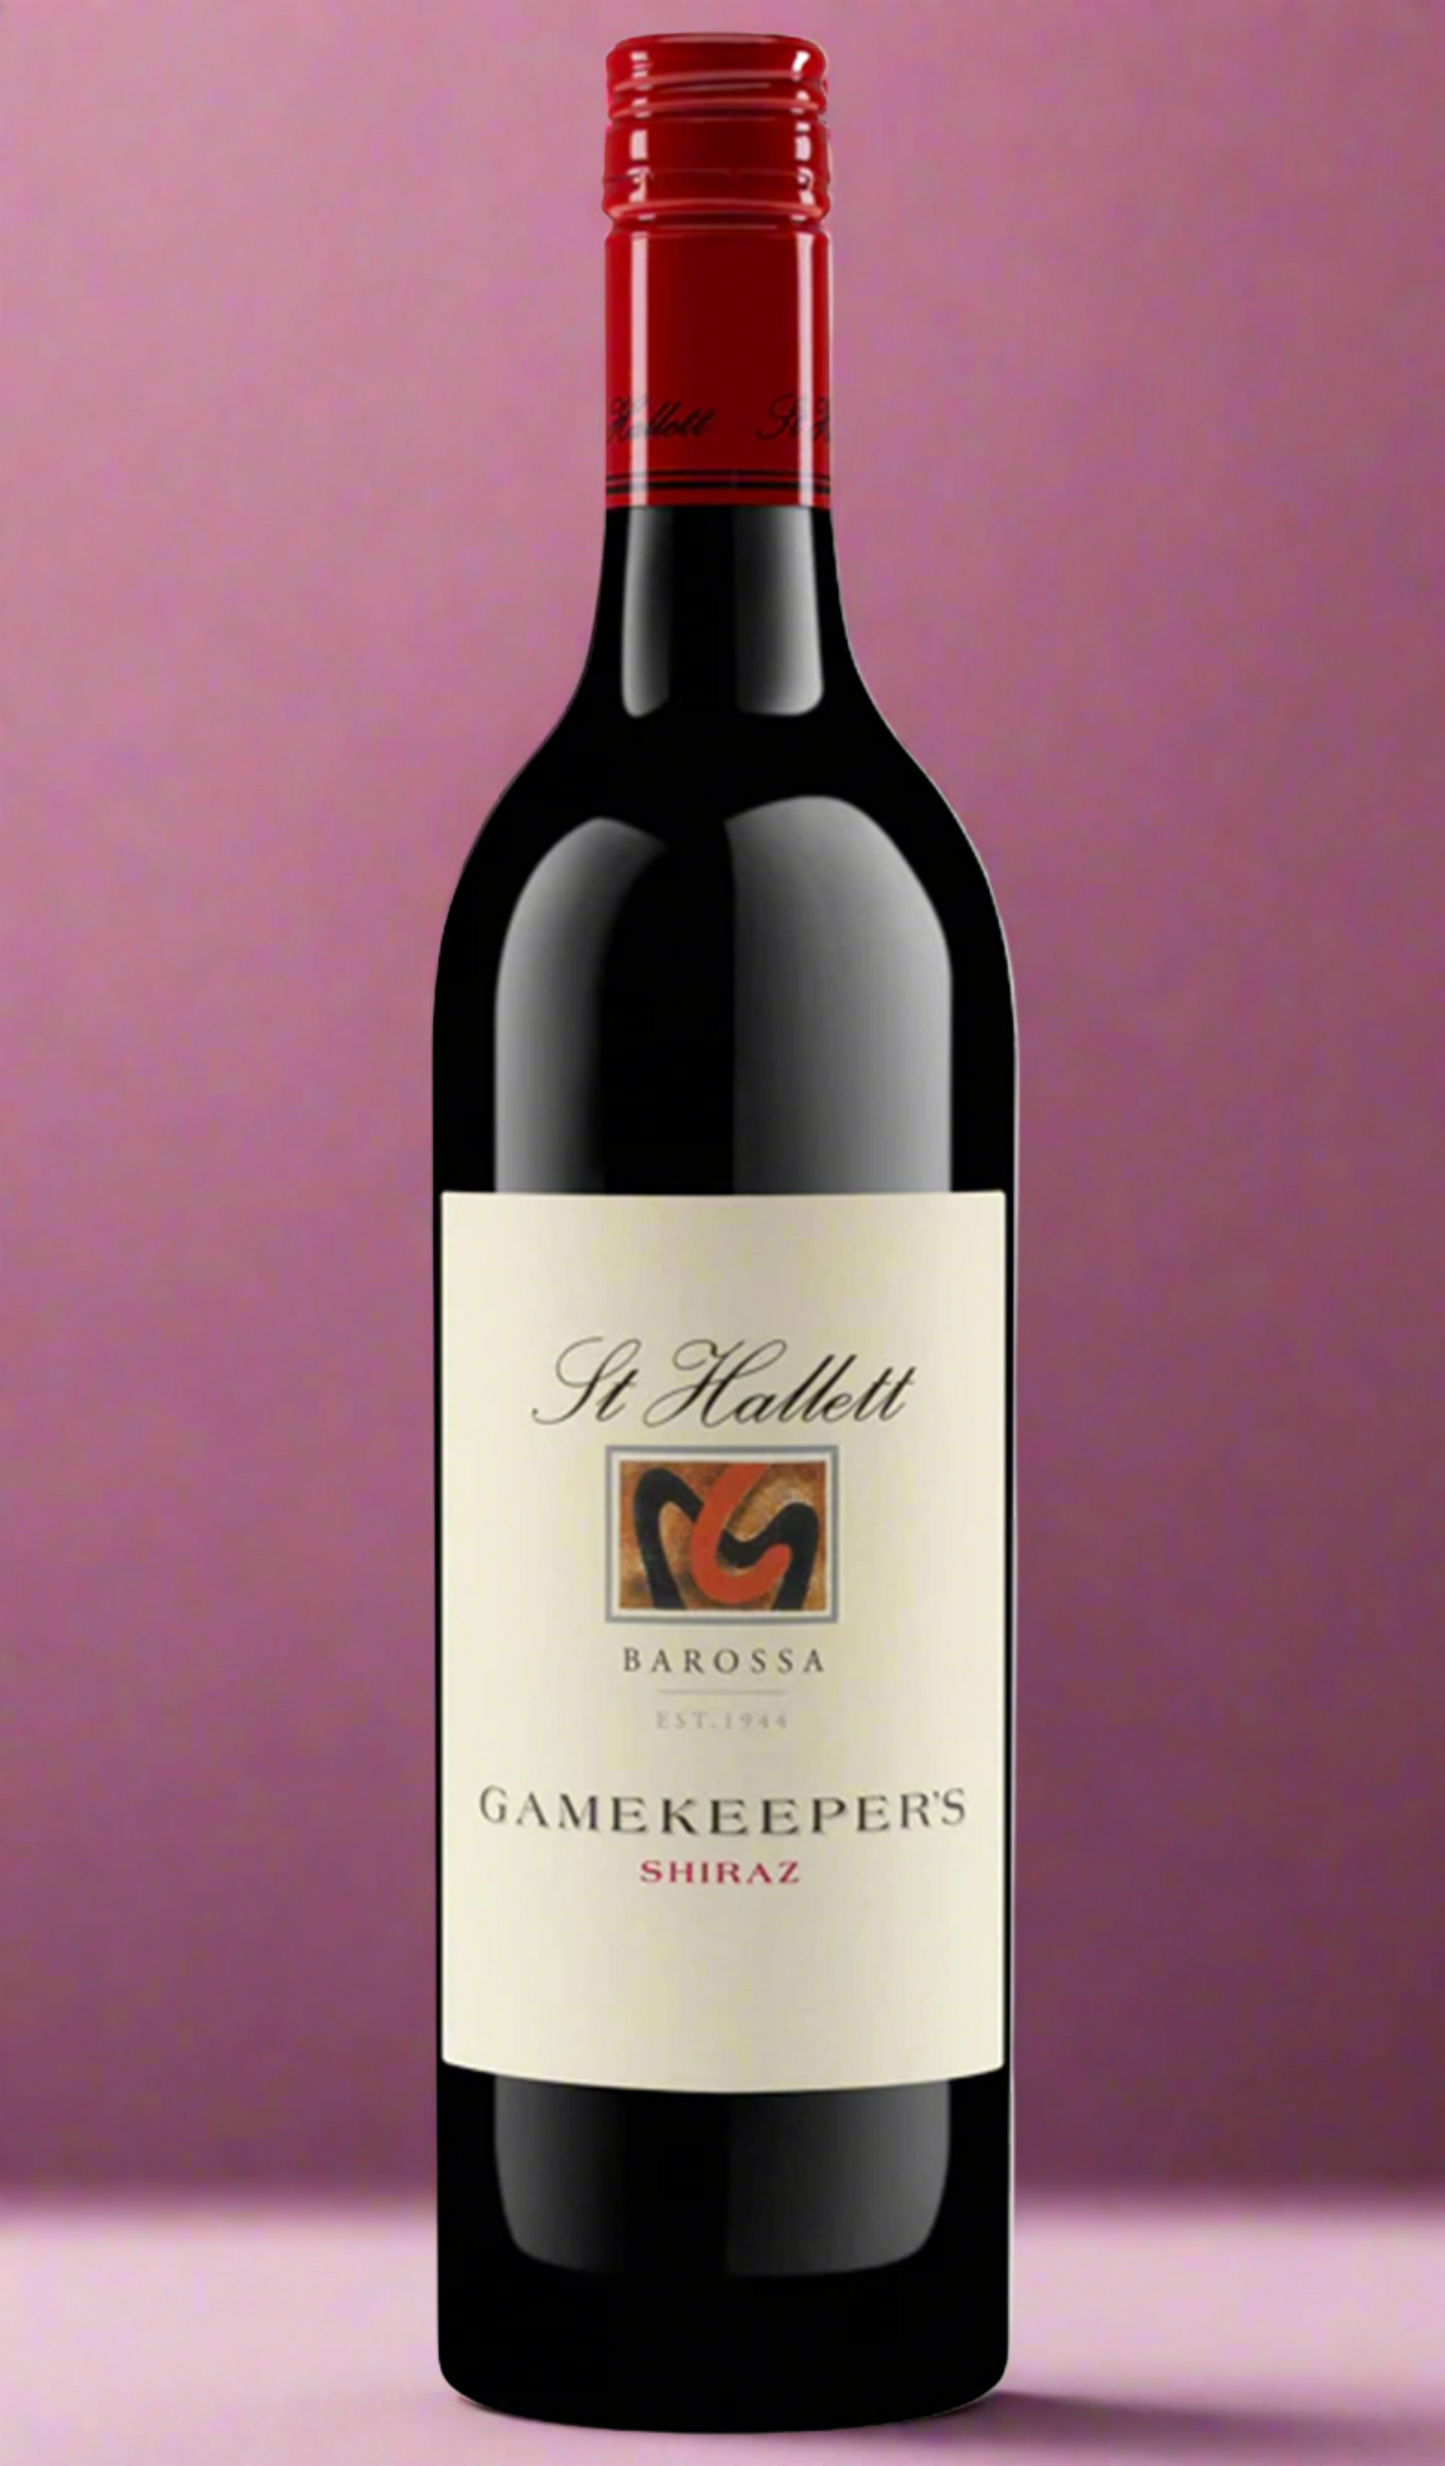 Find out more or buy St Hallett Gamekeeper's Shiraz 2022 (Barossa Valley) online at Wine Sellers Direct - Australia’s independent liquor specialists.